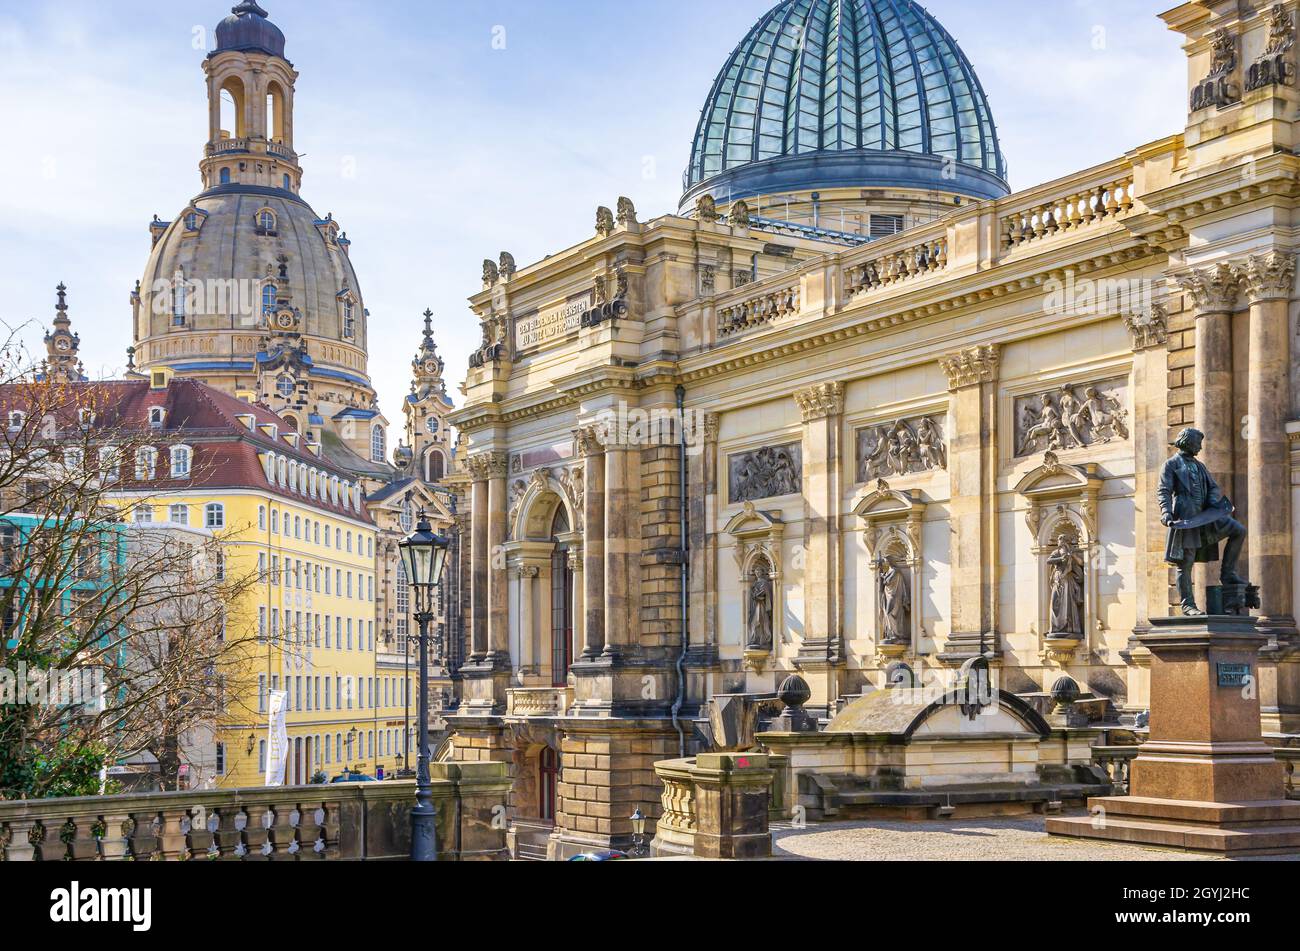 Dresden, Saxony, Germany: Frauenkirche Church and Lipsius Building of the Academy of Fine Arts with Gottfried Semper monument in the foreground. Stock Photo